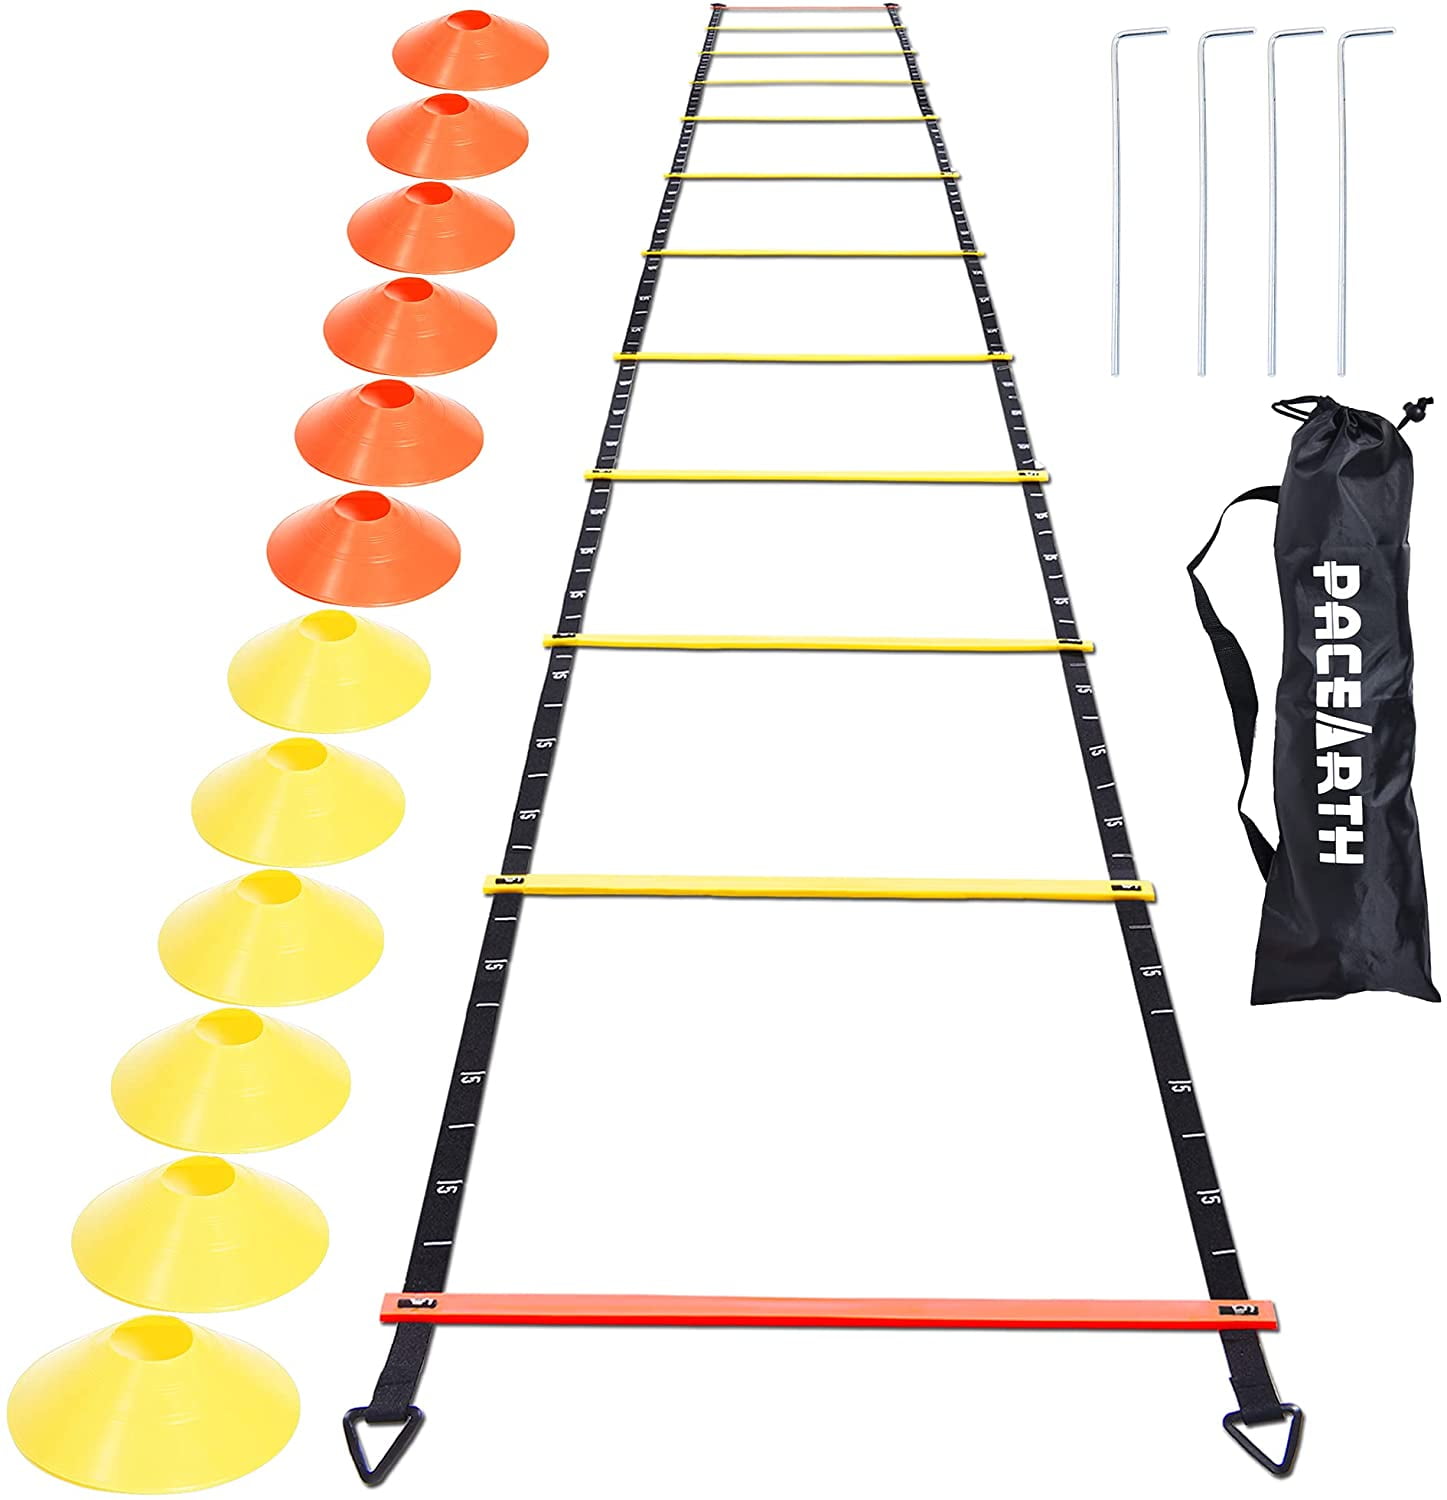 12 Rung Agility Ladder Fixed-Rung Speed Ladders Sports Training Ladders For Football Speed Training Equipment with Carry Bag 